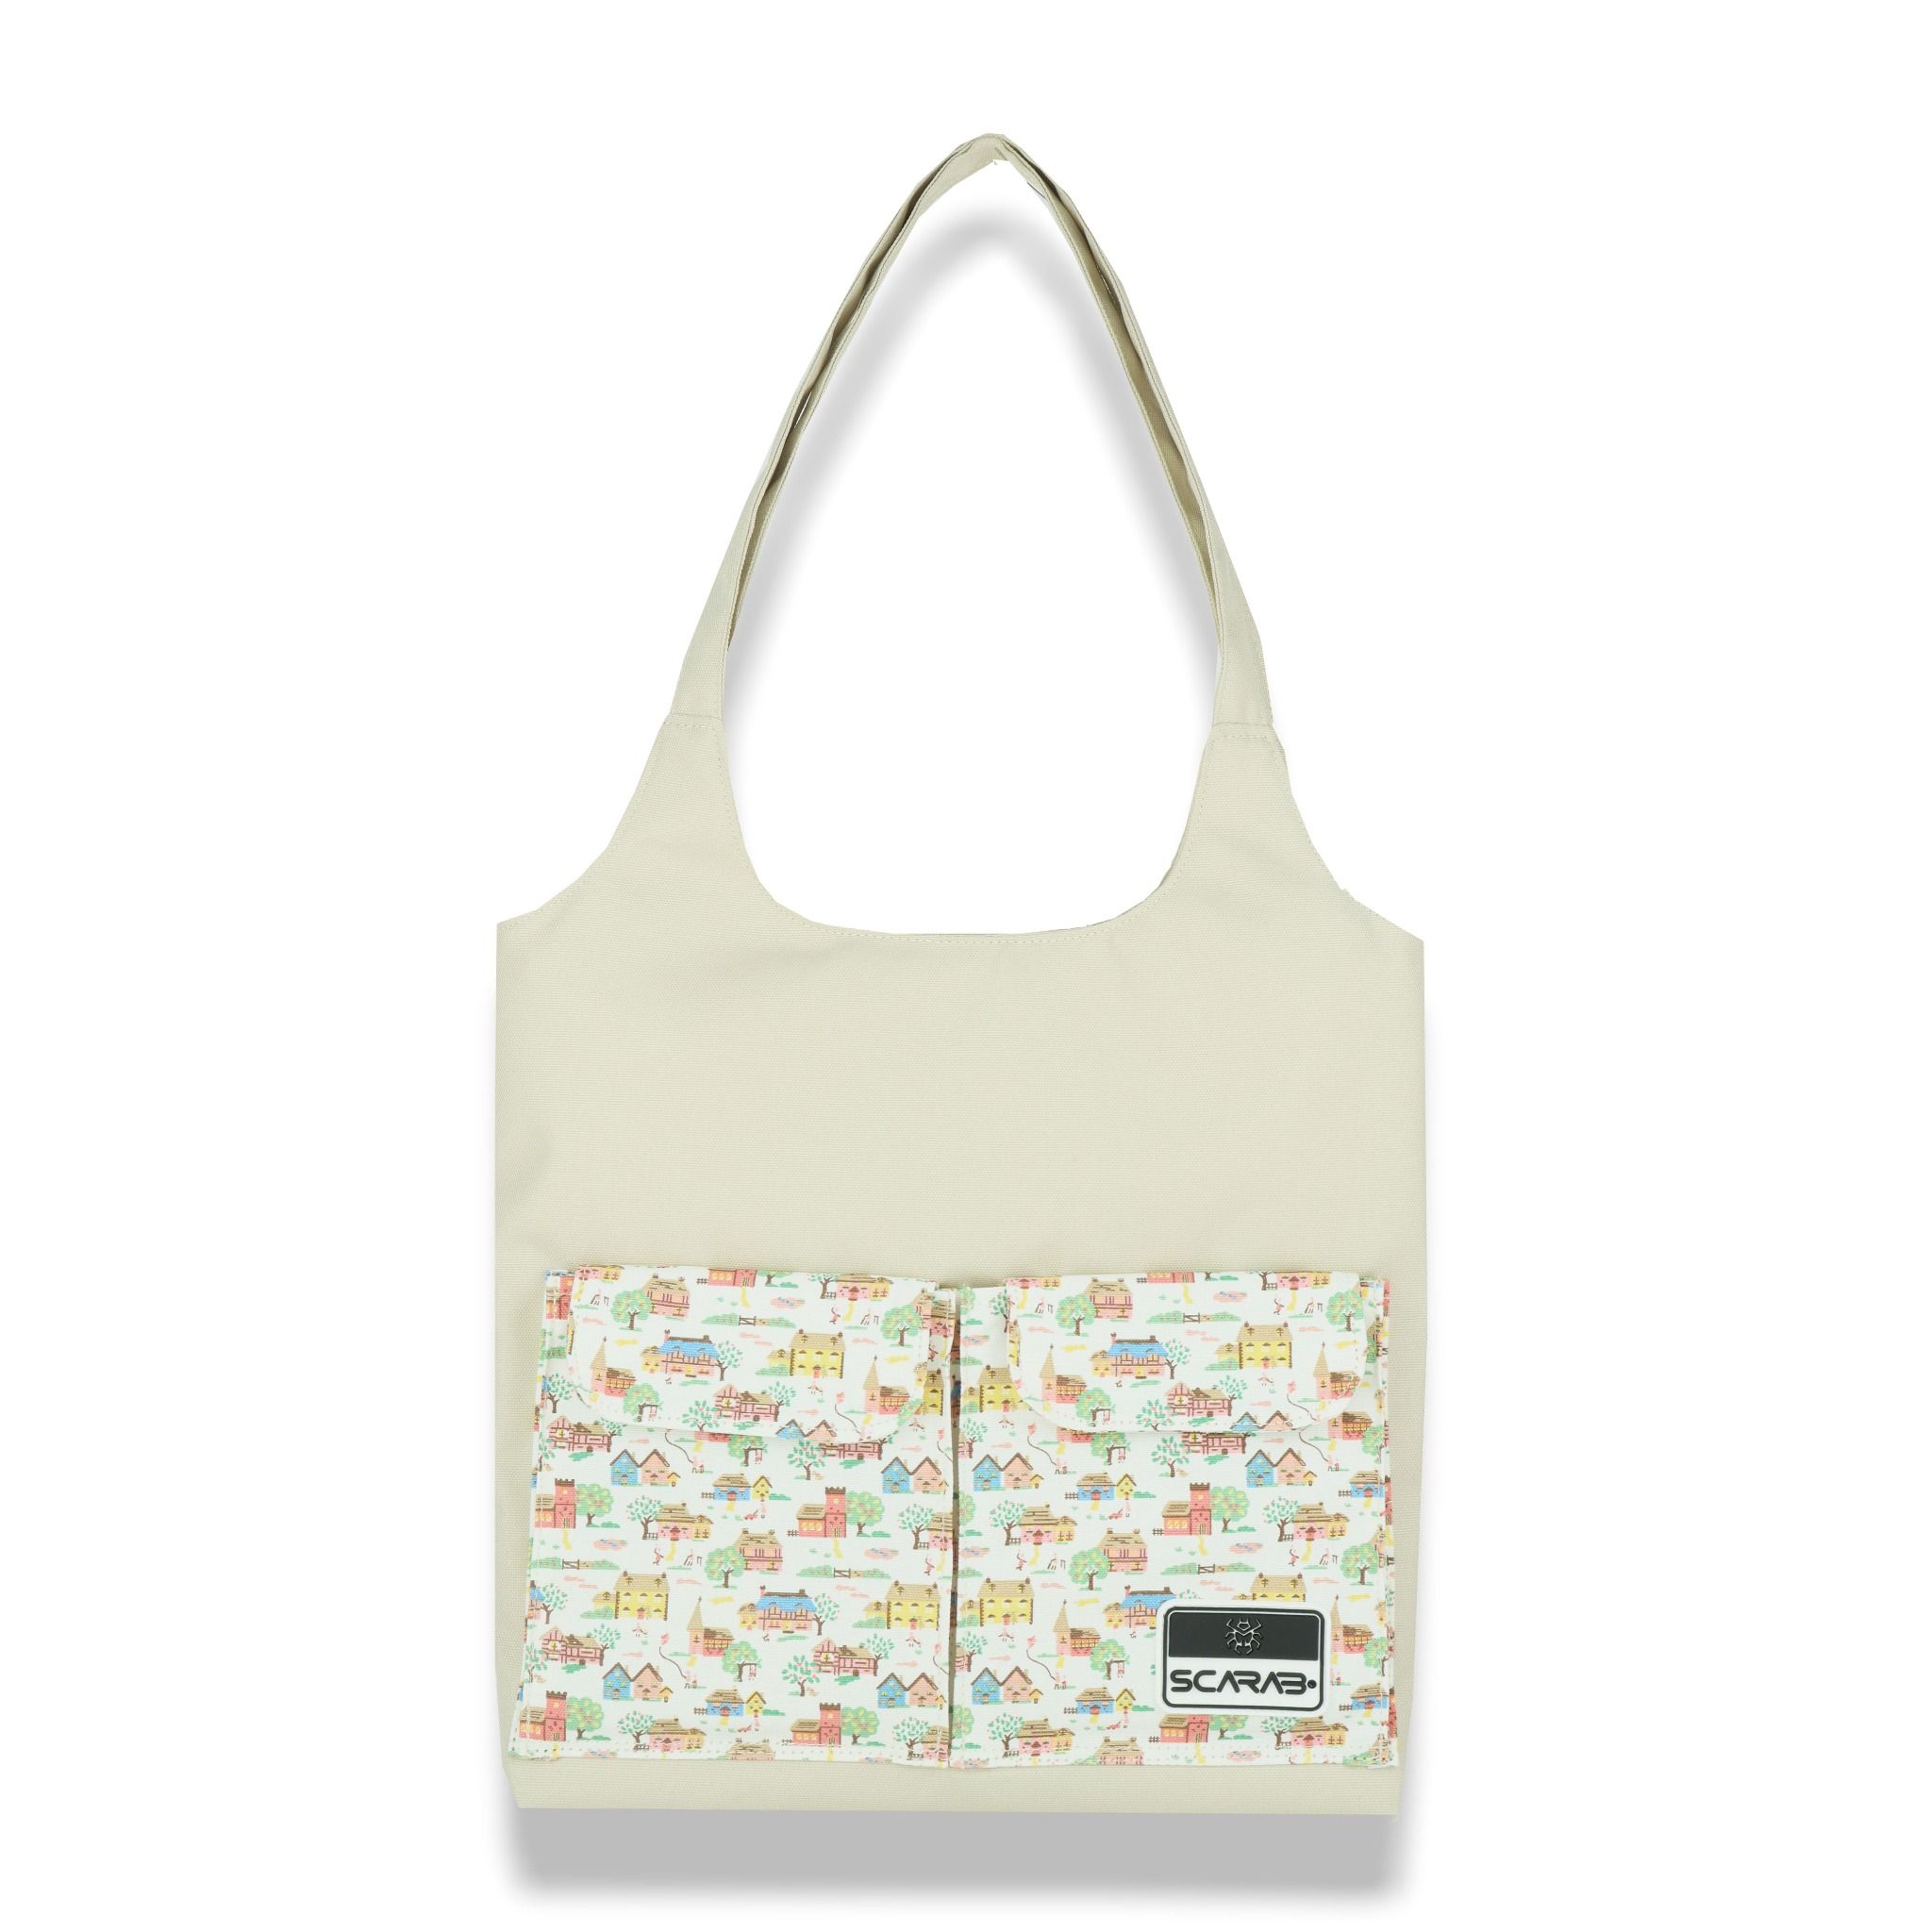  CARRY TOTE BAG - BEIGE 